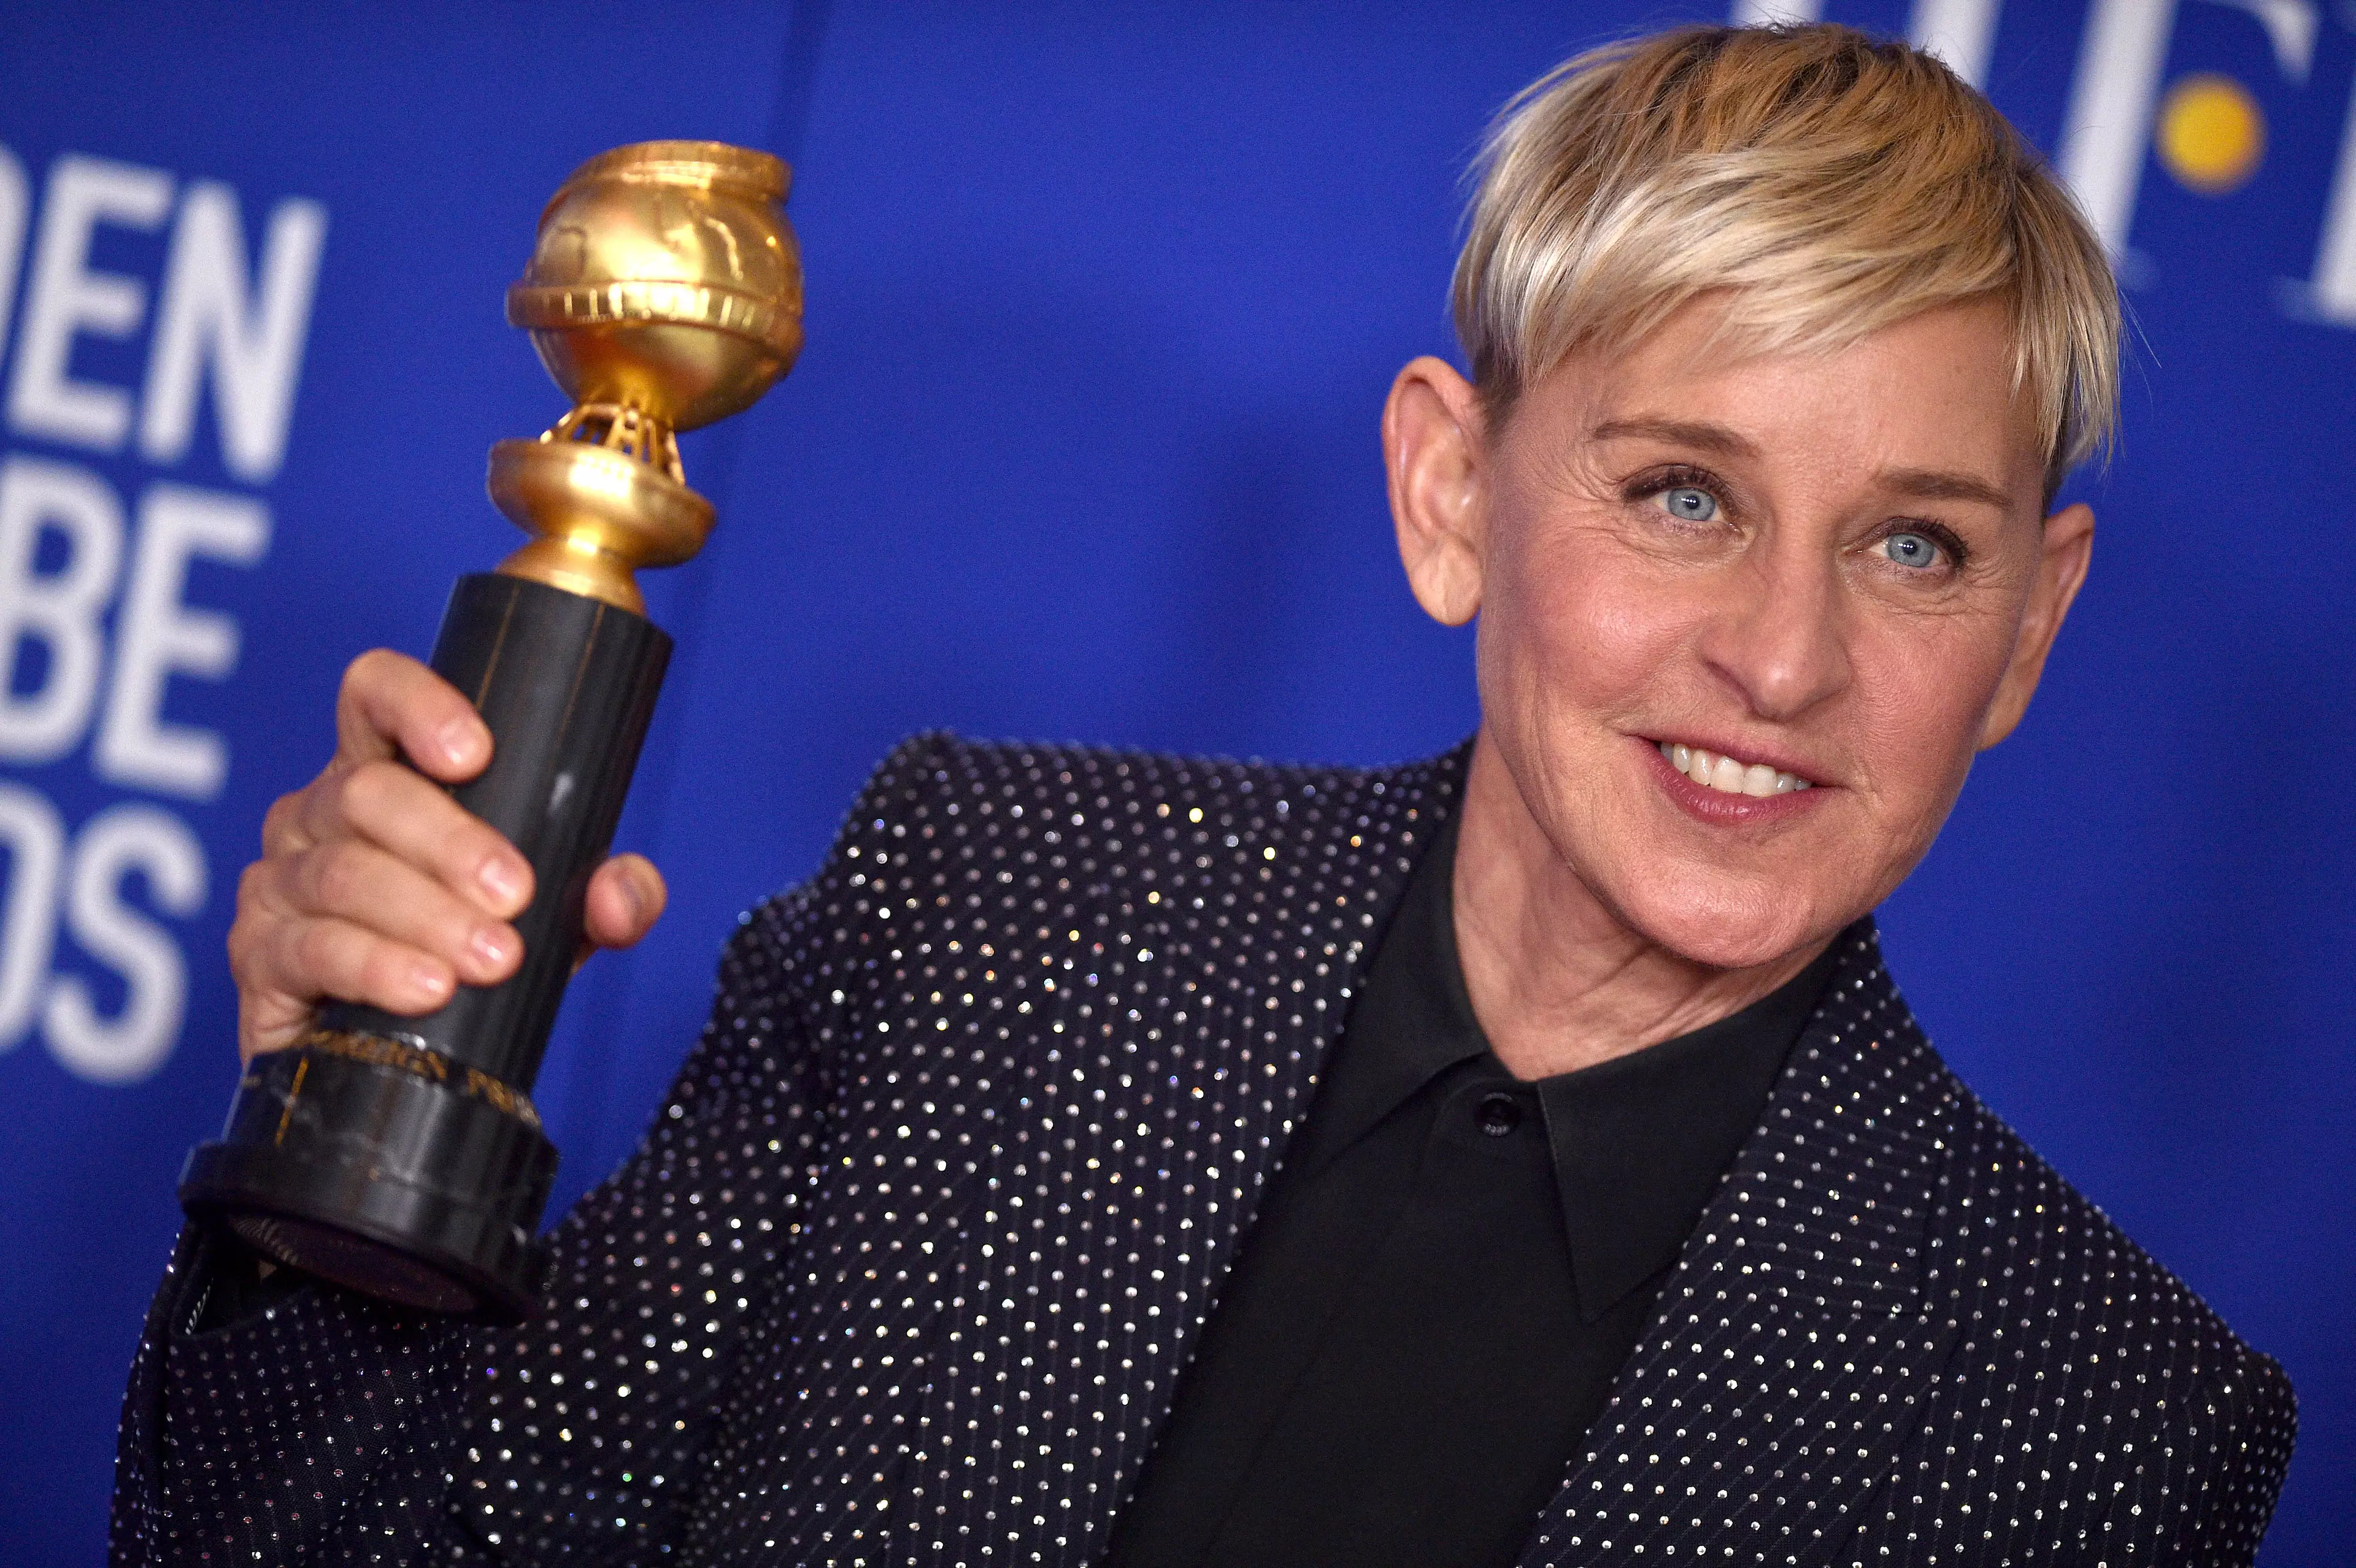 Fresh allegations against staffers have surfaced since Ellen's apology (